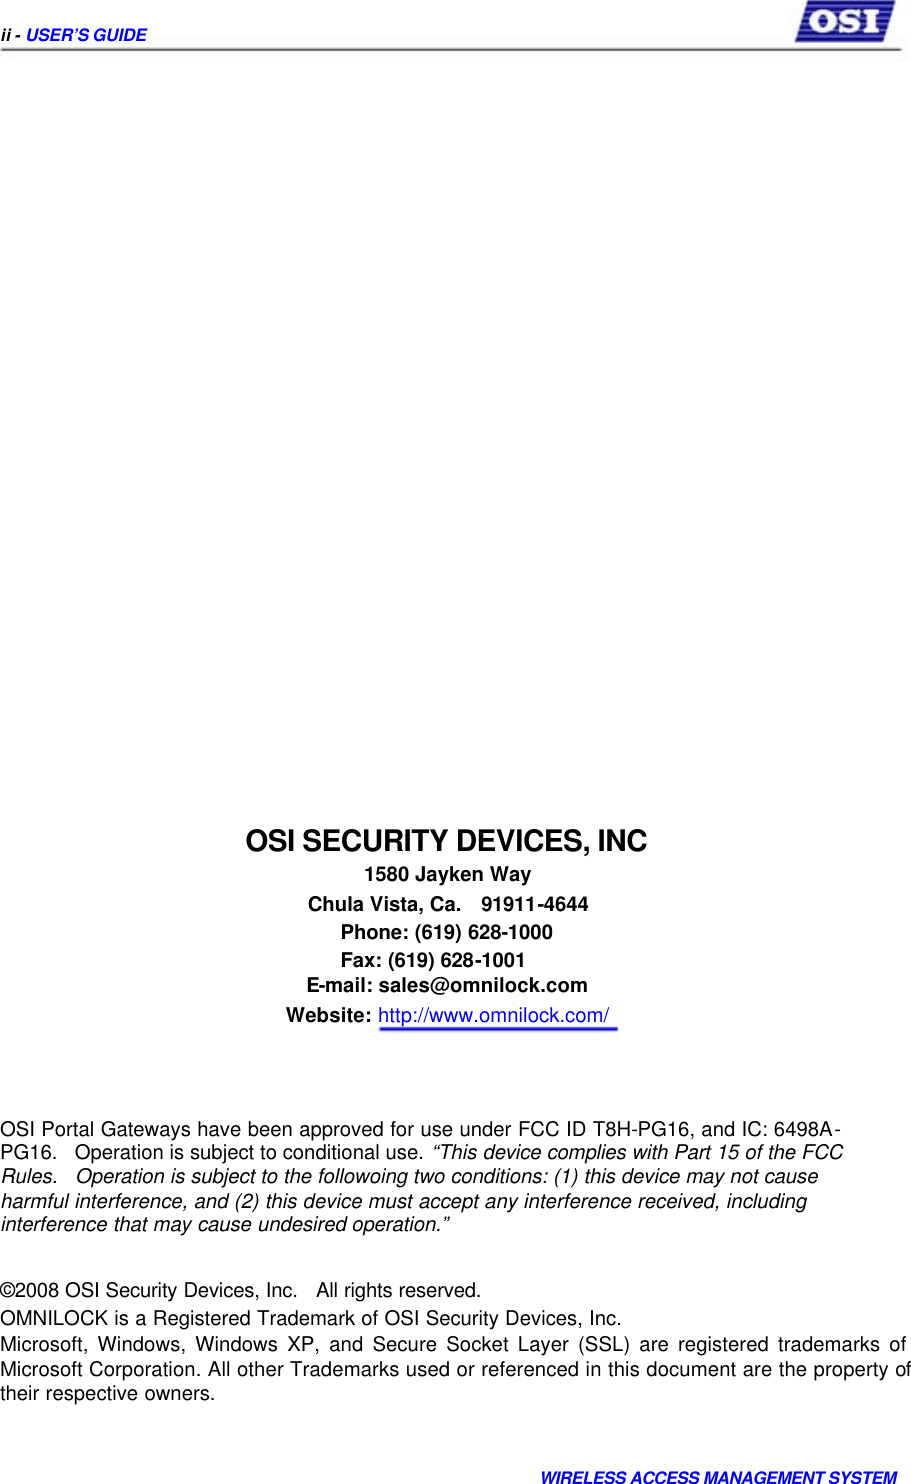     ii - USER’S GUIDE                         OSI SECURITY DEVICES, INC  1580 Jayken Way  Chula Vista, Ca.  91911-4644   Phone: (619) 628-1000   Fax: (619) 628-1001  E-mail: sales@omnilock.com  Website: http://www.omnilock.com/     OSI Portal Gateways have been approved for use under FCC ID T8H-PG16, and IC: 6498A- PG16.   Operation is subject to conditional use. “This device complies with Part 15 of the FCC Rules.   Operation is subject to the followoing two conditions: (1) this device may not cause harmful interference, and (2) this device must accept any interference received, including interference that may cause undesired operation.”   ©2008 OSI Security Devices, Inc.   All rights reserved.  OMNILOCK is a Registered Trademark of OSI Security Devices, Inc.  Microsoft, Windows, Windows XP, and Secure Socket Layer (SSL) are registered trademarks of Microsoft Corporation. All other Trademarks used or referenced in this document are the property of their respective owners.     WIRELESS ACCESS MANAGEMENT SYSTEM  